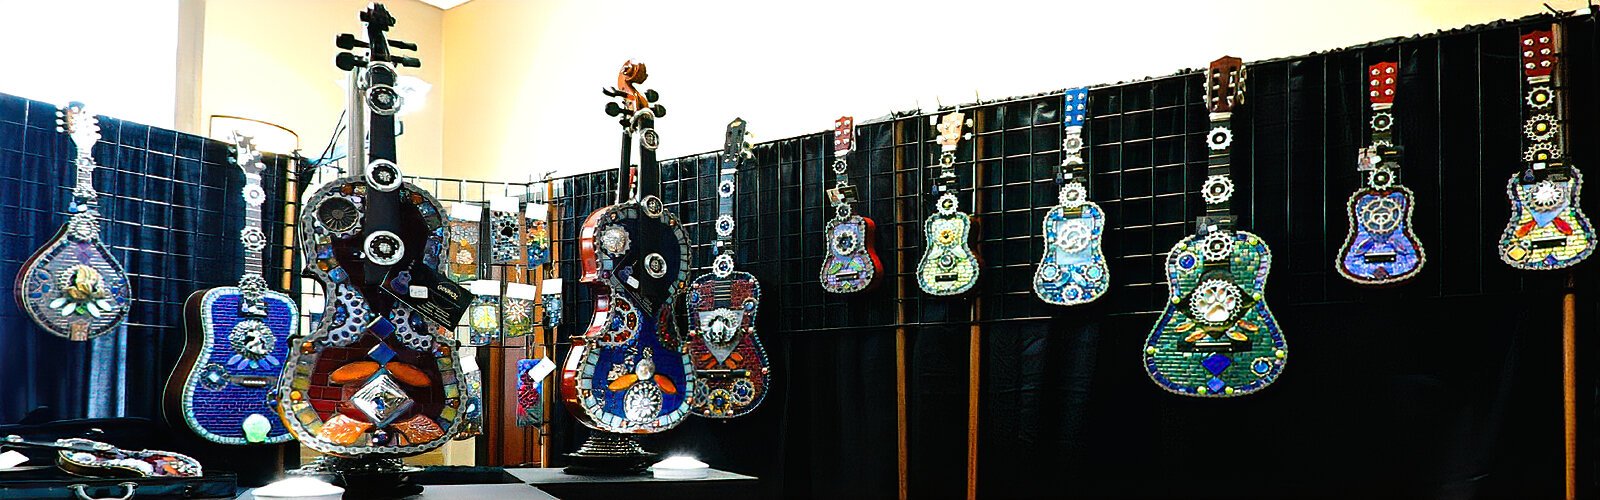 Ginhol Mosaics showcases repurposed guitars, mandolins and violins embellished with vivid colorful stained glass, salvaged bicycle parts and found metal objects by Safety Harbor mosaic artist Holly Apperson.